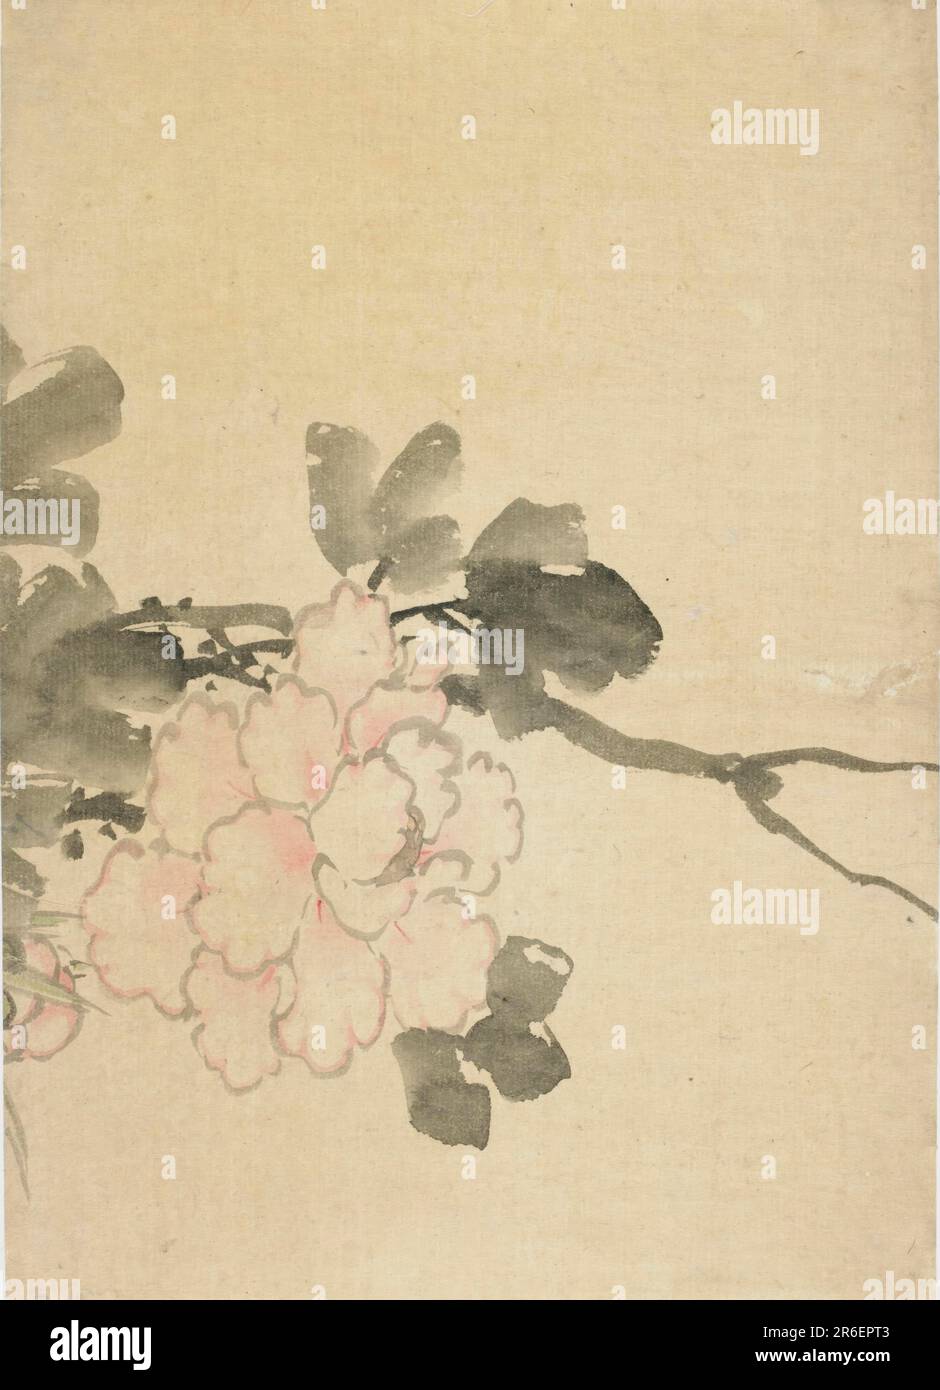 Peony. Origin: Japan. Period: Edo period. Date: 1760-1849. Ink and color on paper. Museum: Freer Gallery of Art and Arthur M. Sackler Gallery. Stock Photo